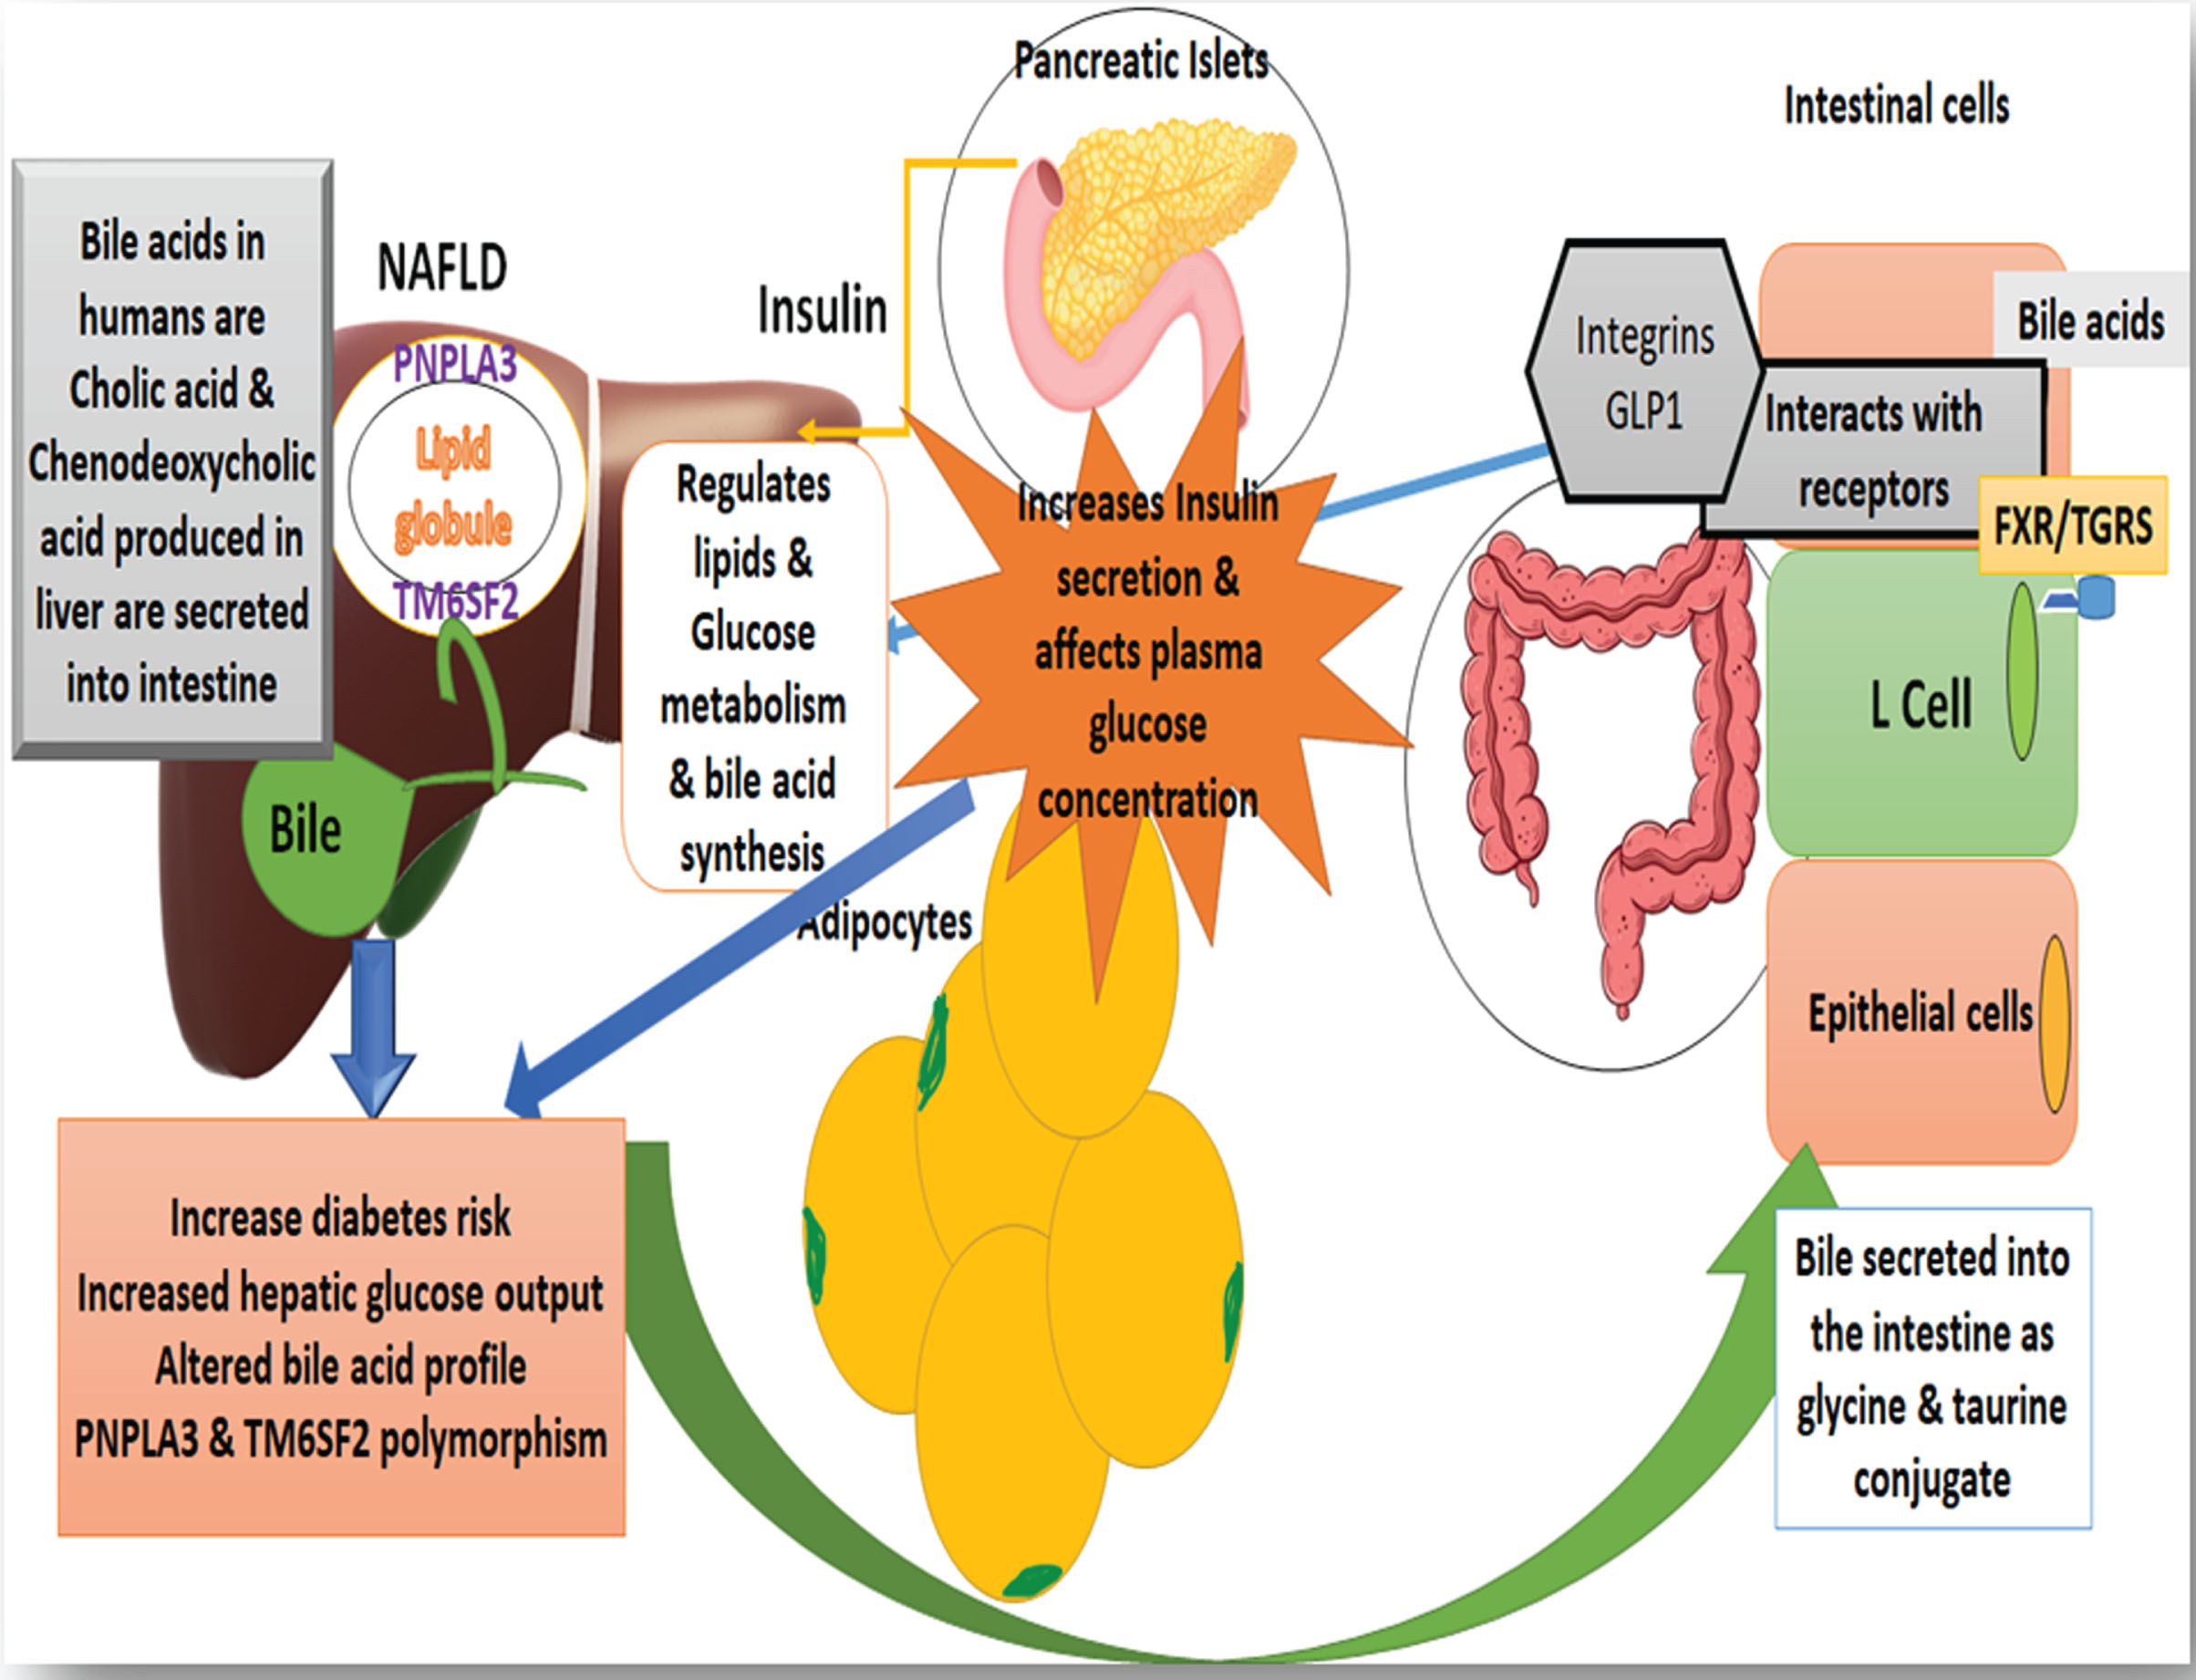 Illustrates the association between the liver, bile, and gut that may lead to receptor alteration and change insulin metabolism and bile acid production. In non-alcoholic fatty liver disease (NAFLD), hepatic insulin extraction decreases, which accounts for 50–80% of insulin clearance. Fatty acid and triglyceride production is decreased by activating hepatic FXR receptors, possibly due to less hepatic lipid accumulation.